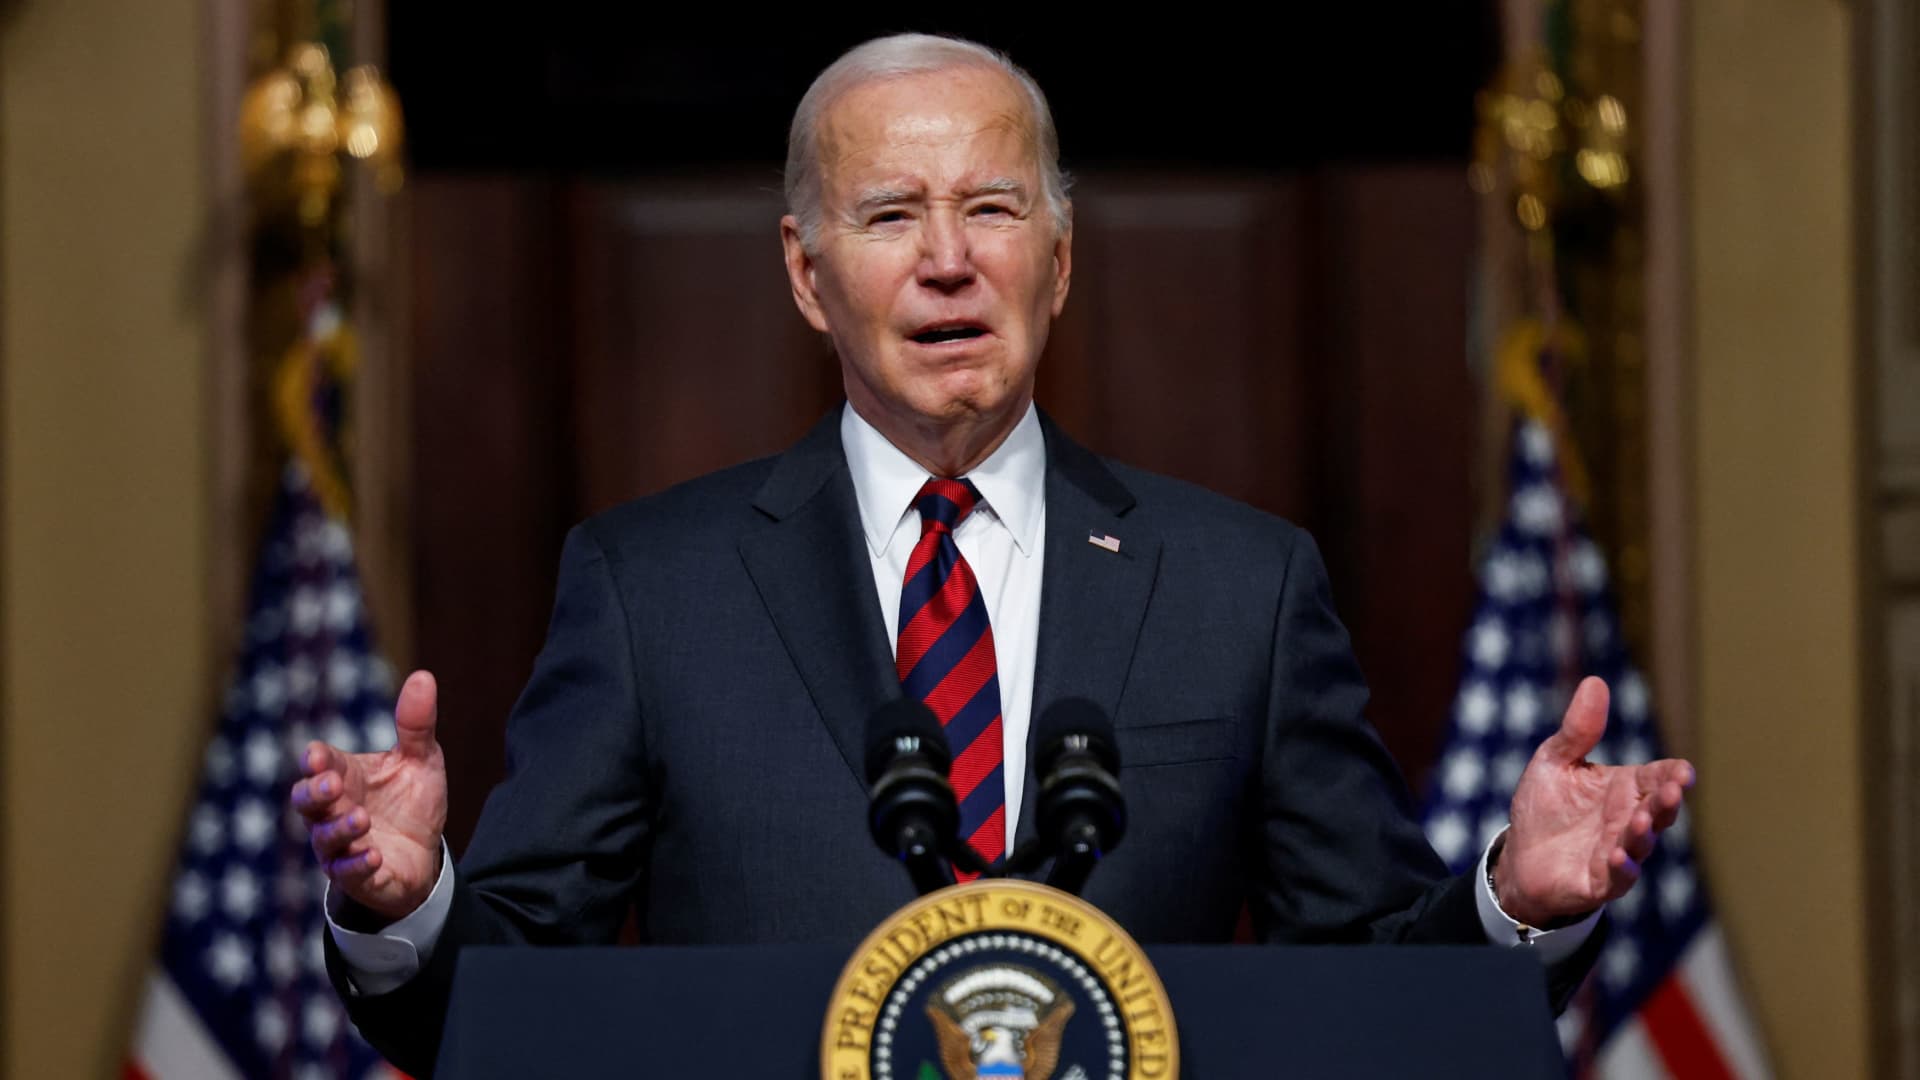 ‘Stop the price gouging’: Biden hits corporations over high consumer costs - CNBC